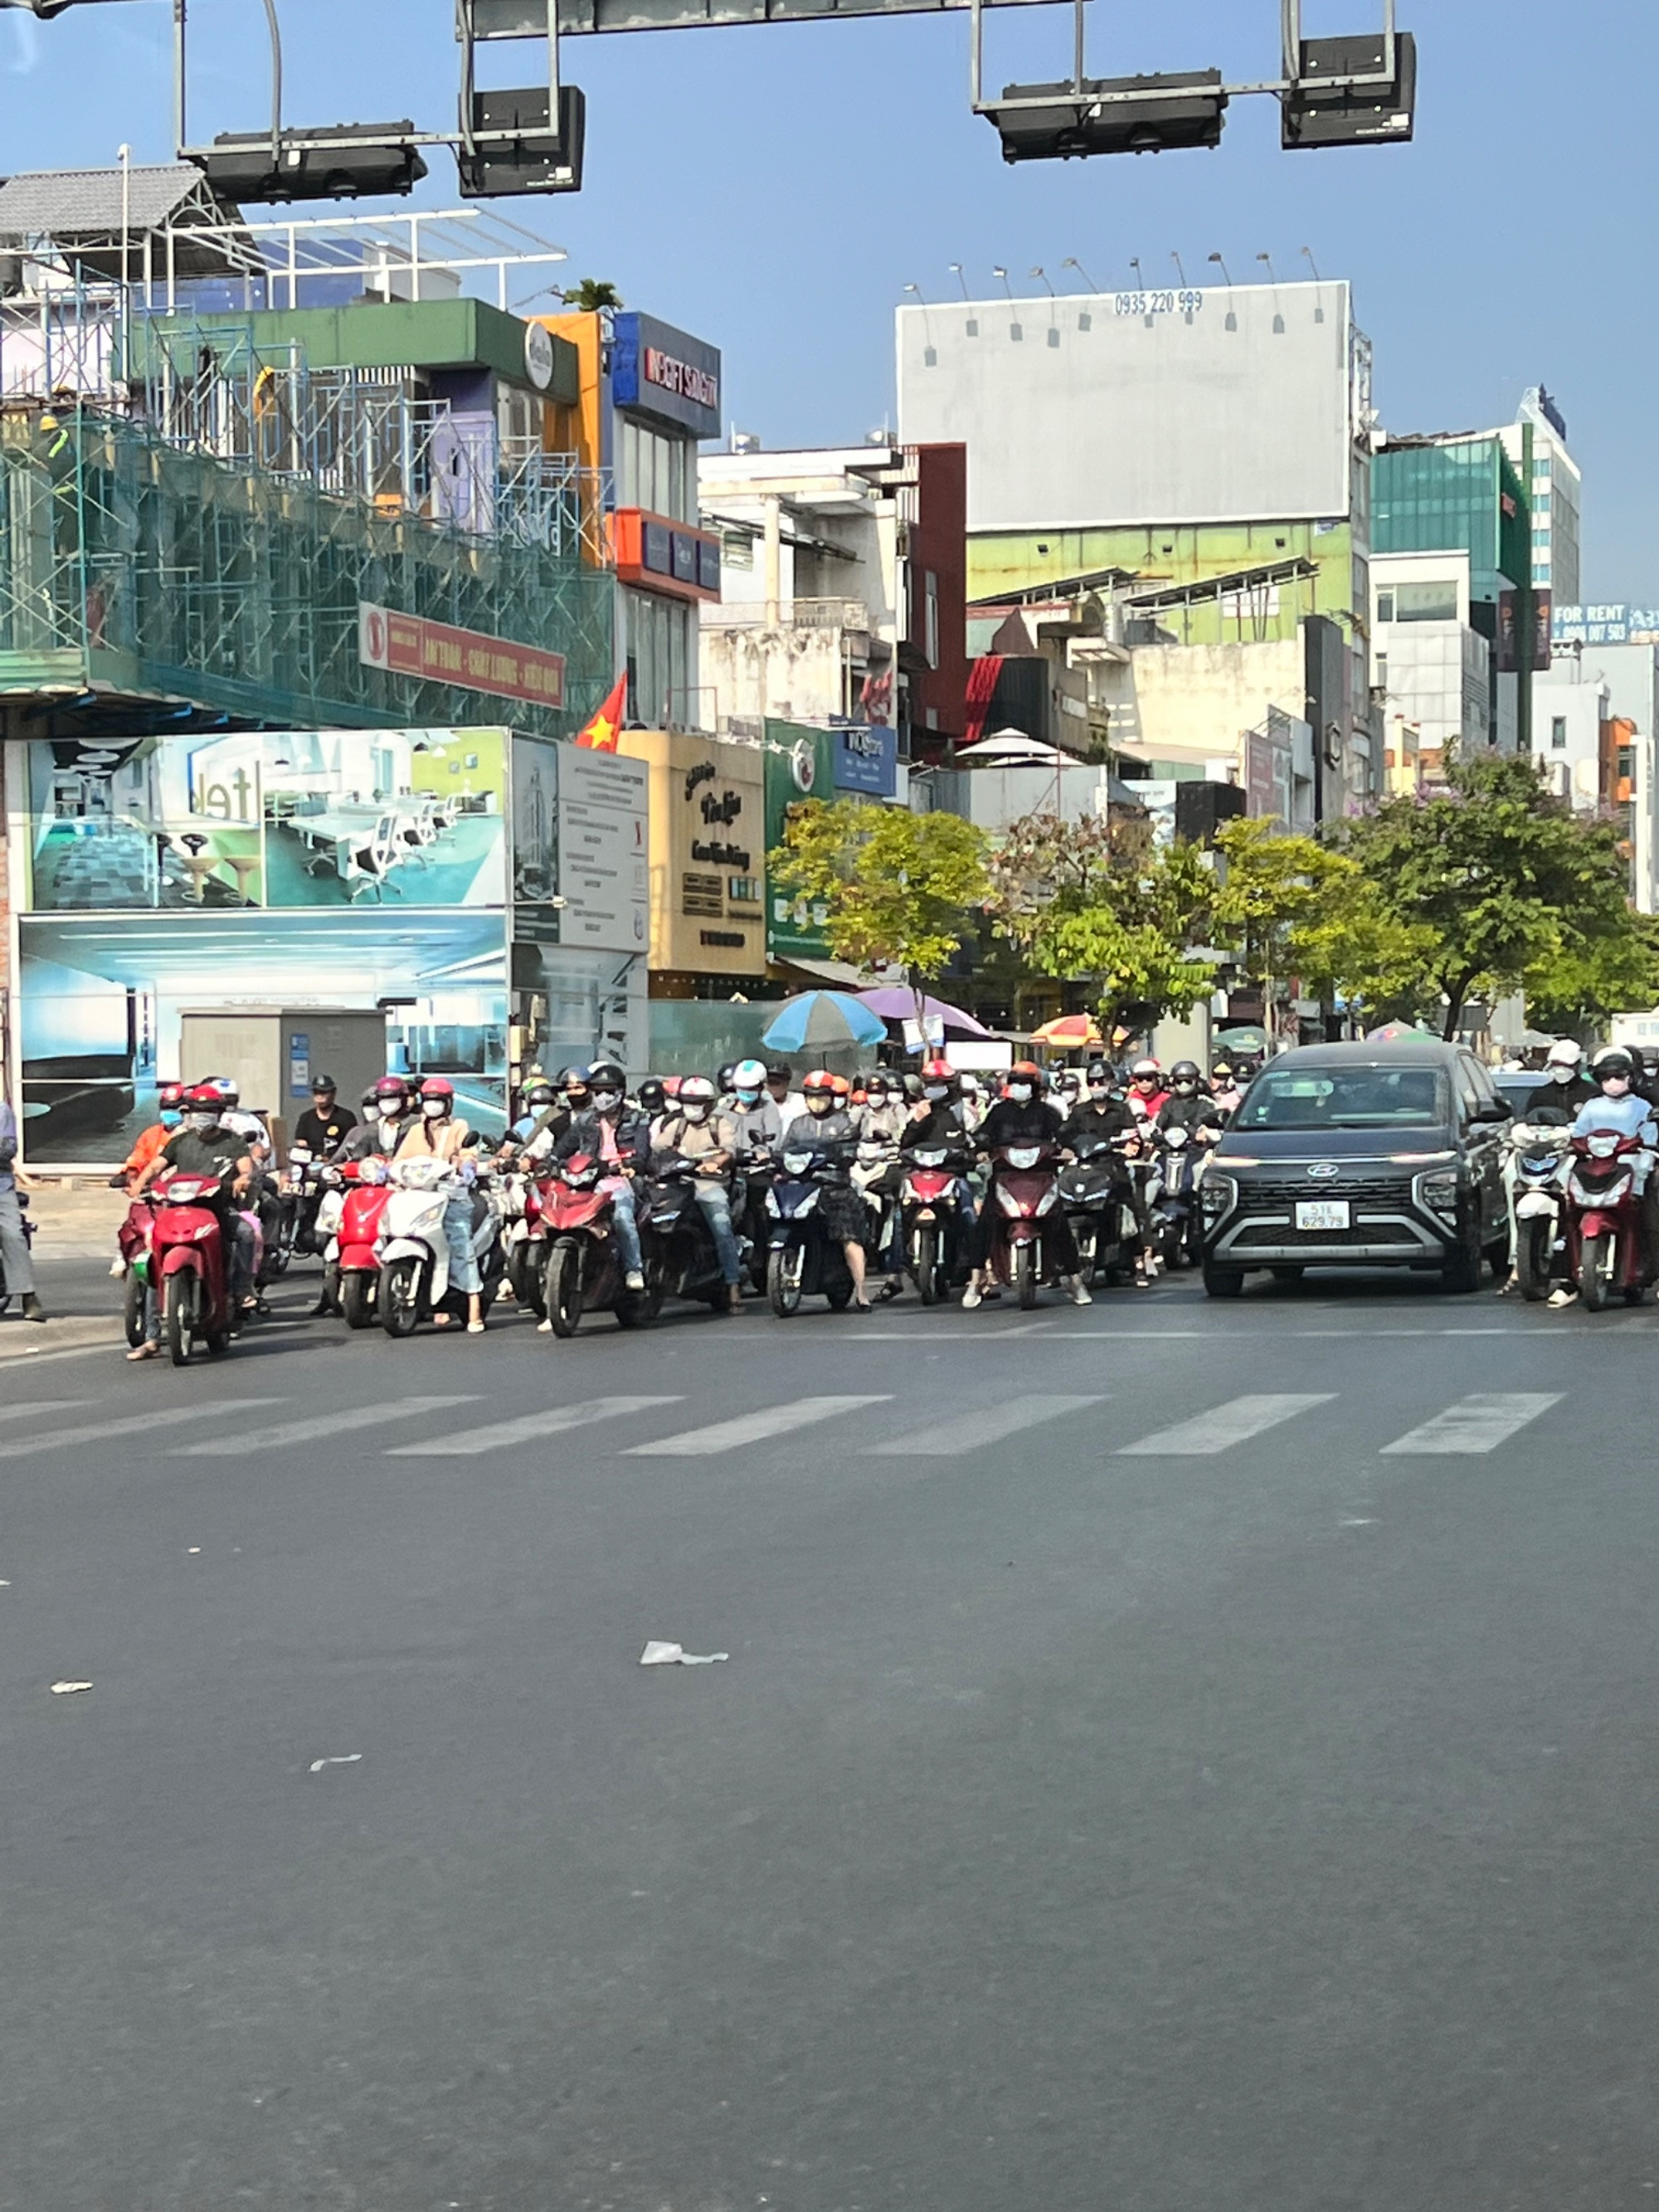 Lots and lots of motorbikes at an intersection in Ho Chi Minh City